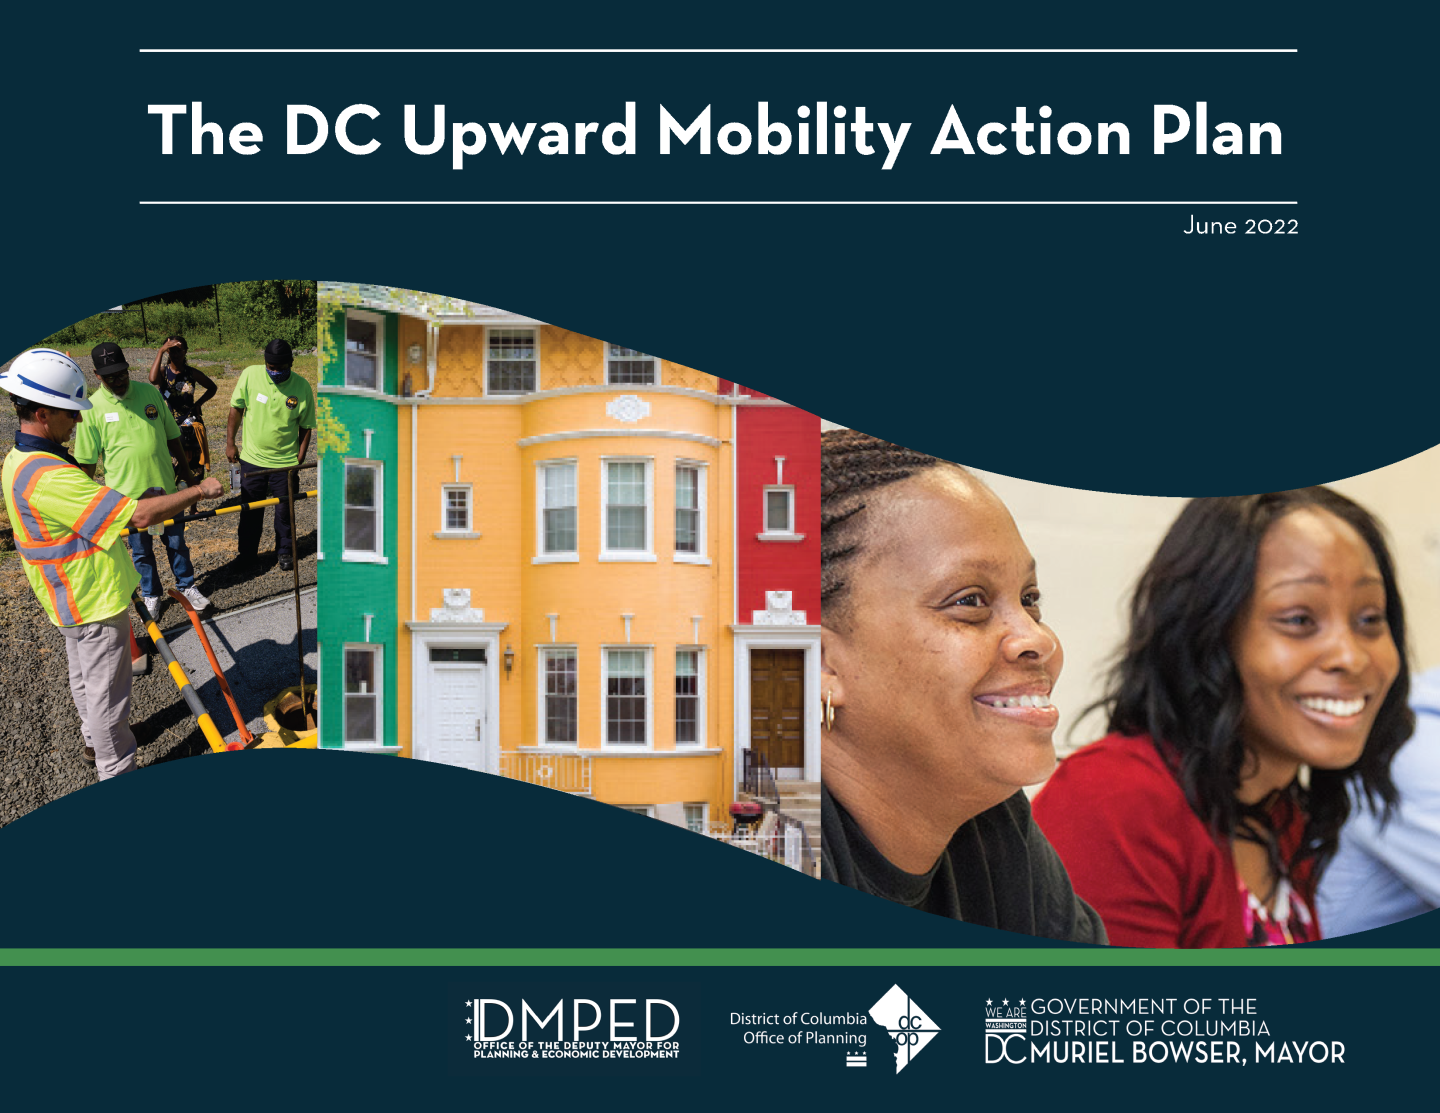 Cover image of the DC Upward Mobility Action Plan